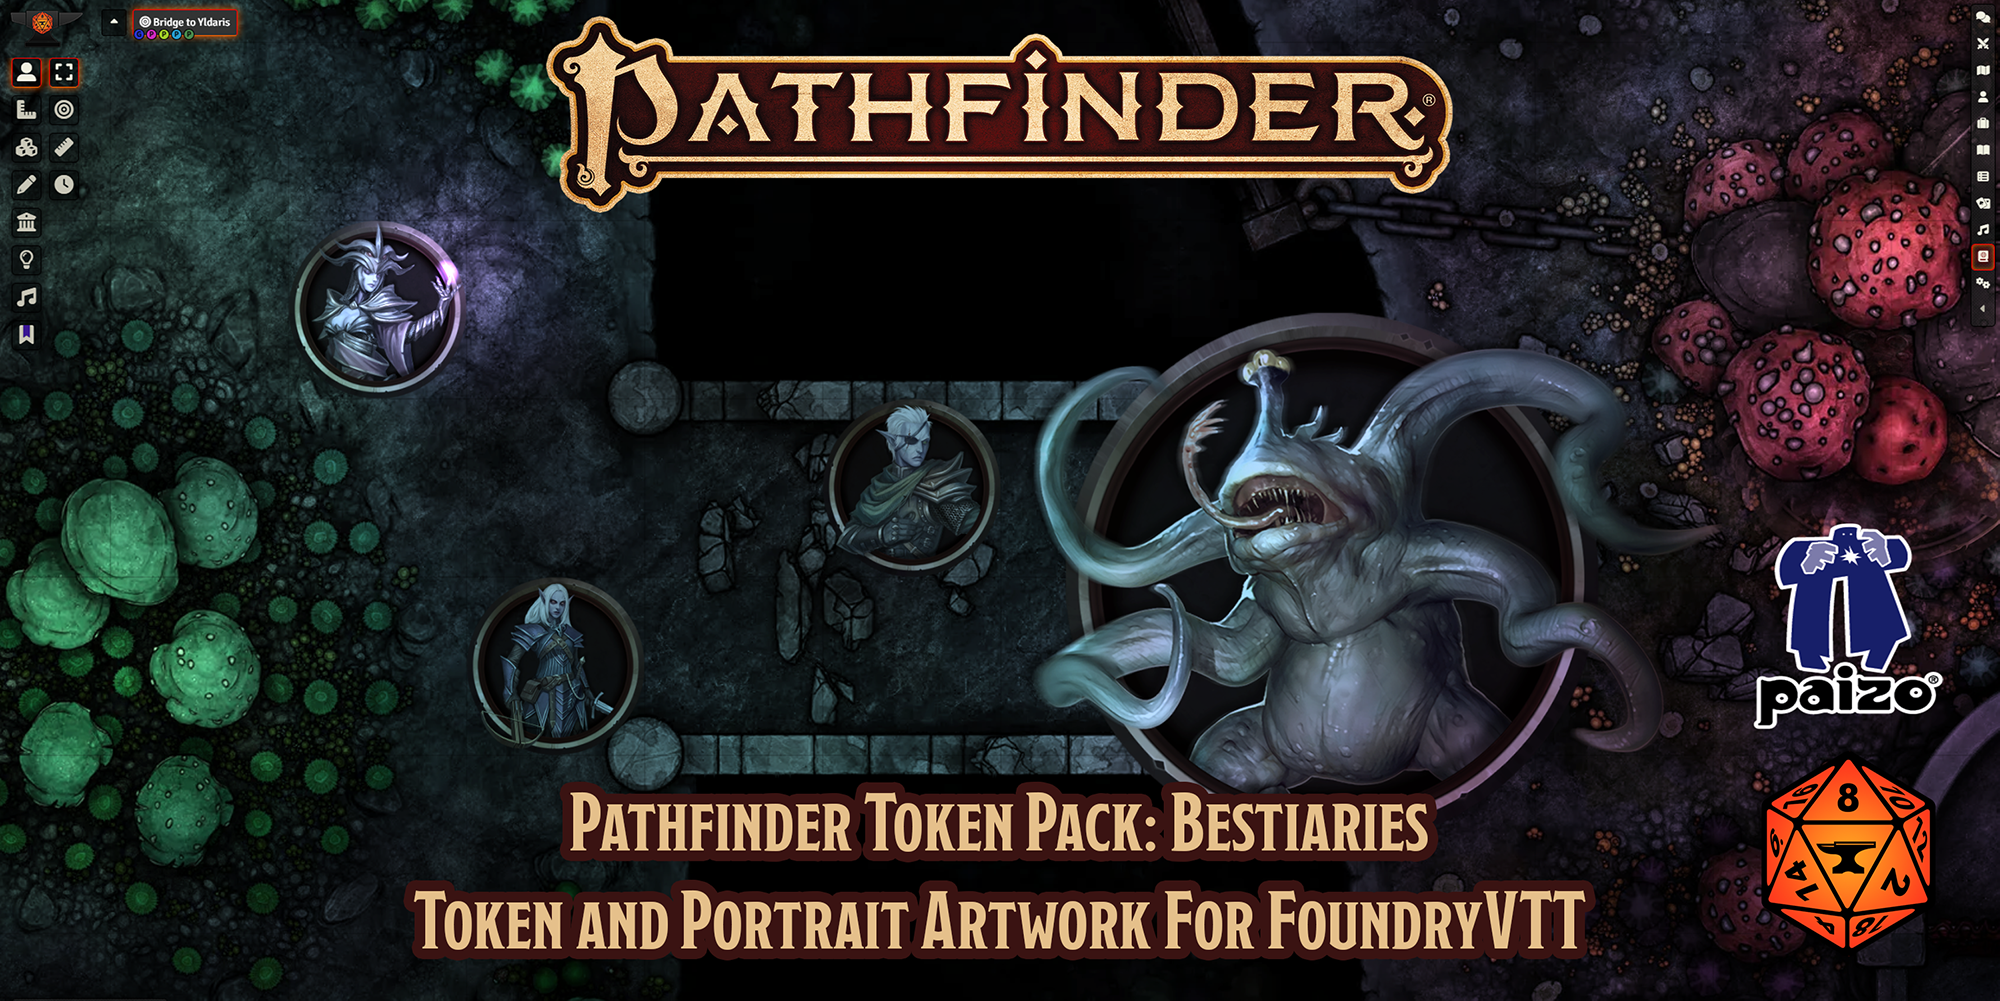 Pathfinder Token Pack: Bestiaries - Token and Portrait Artwork for Foundry VTT' text overlayed over image of Pathfinder Foundry Token pack screenshot featuring many different sized heroes facing a large many armed monsterT